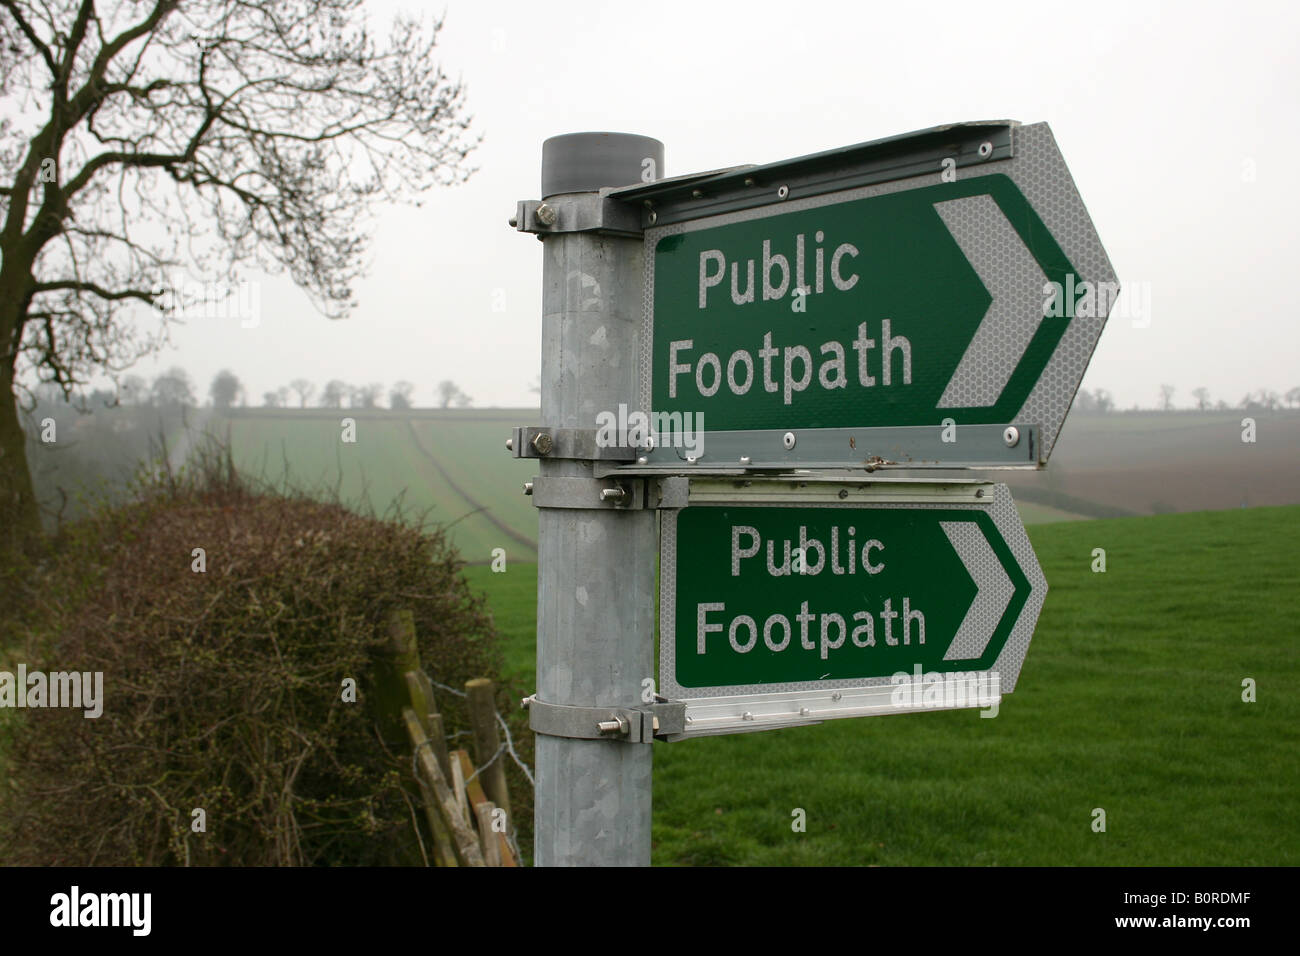 A public footpath sign in the English countryside. Stock Photo